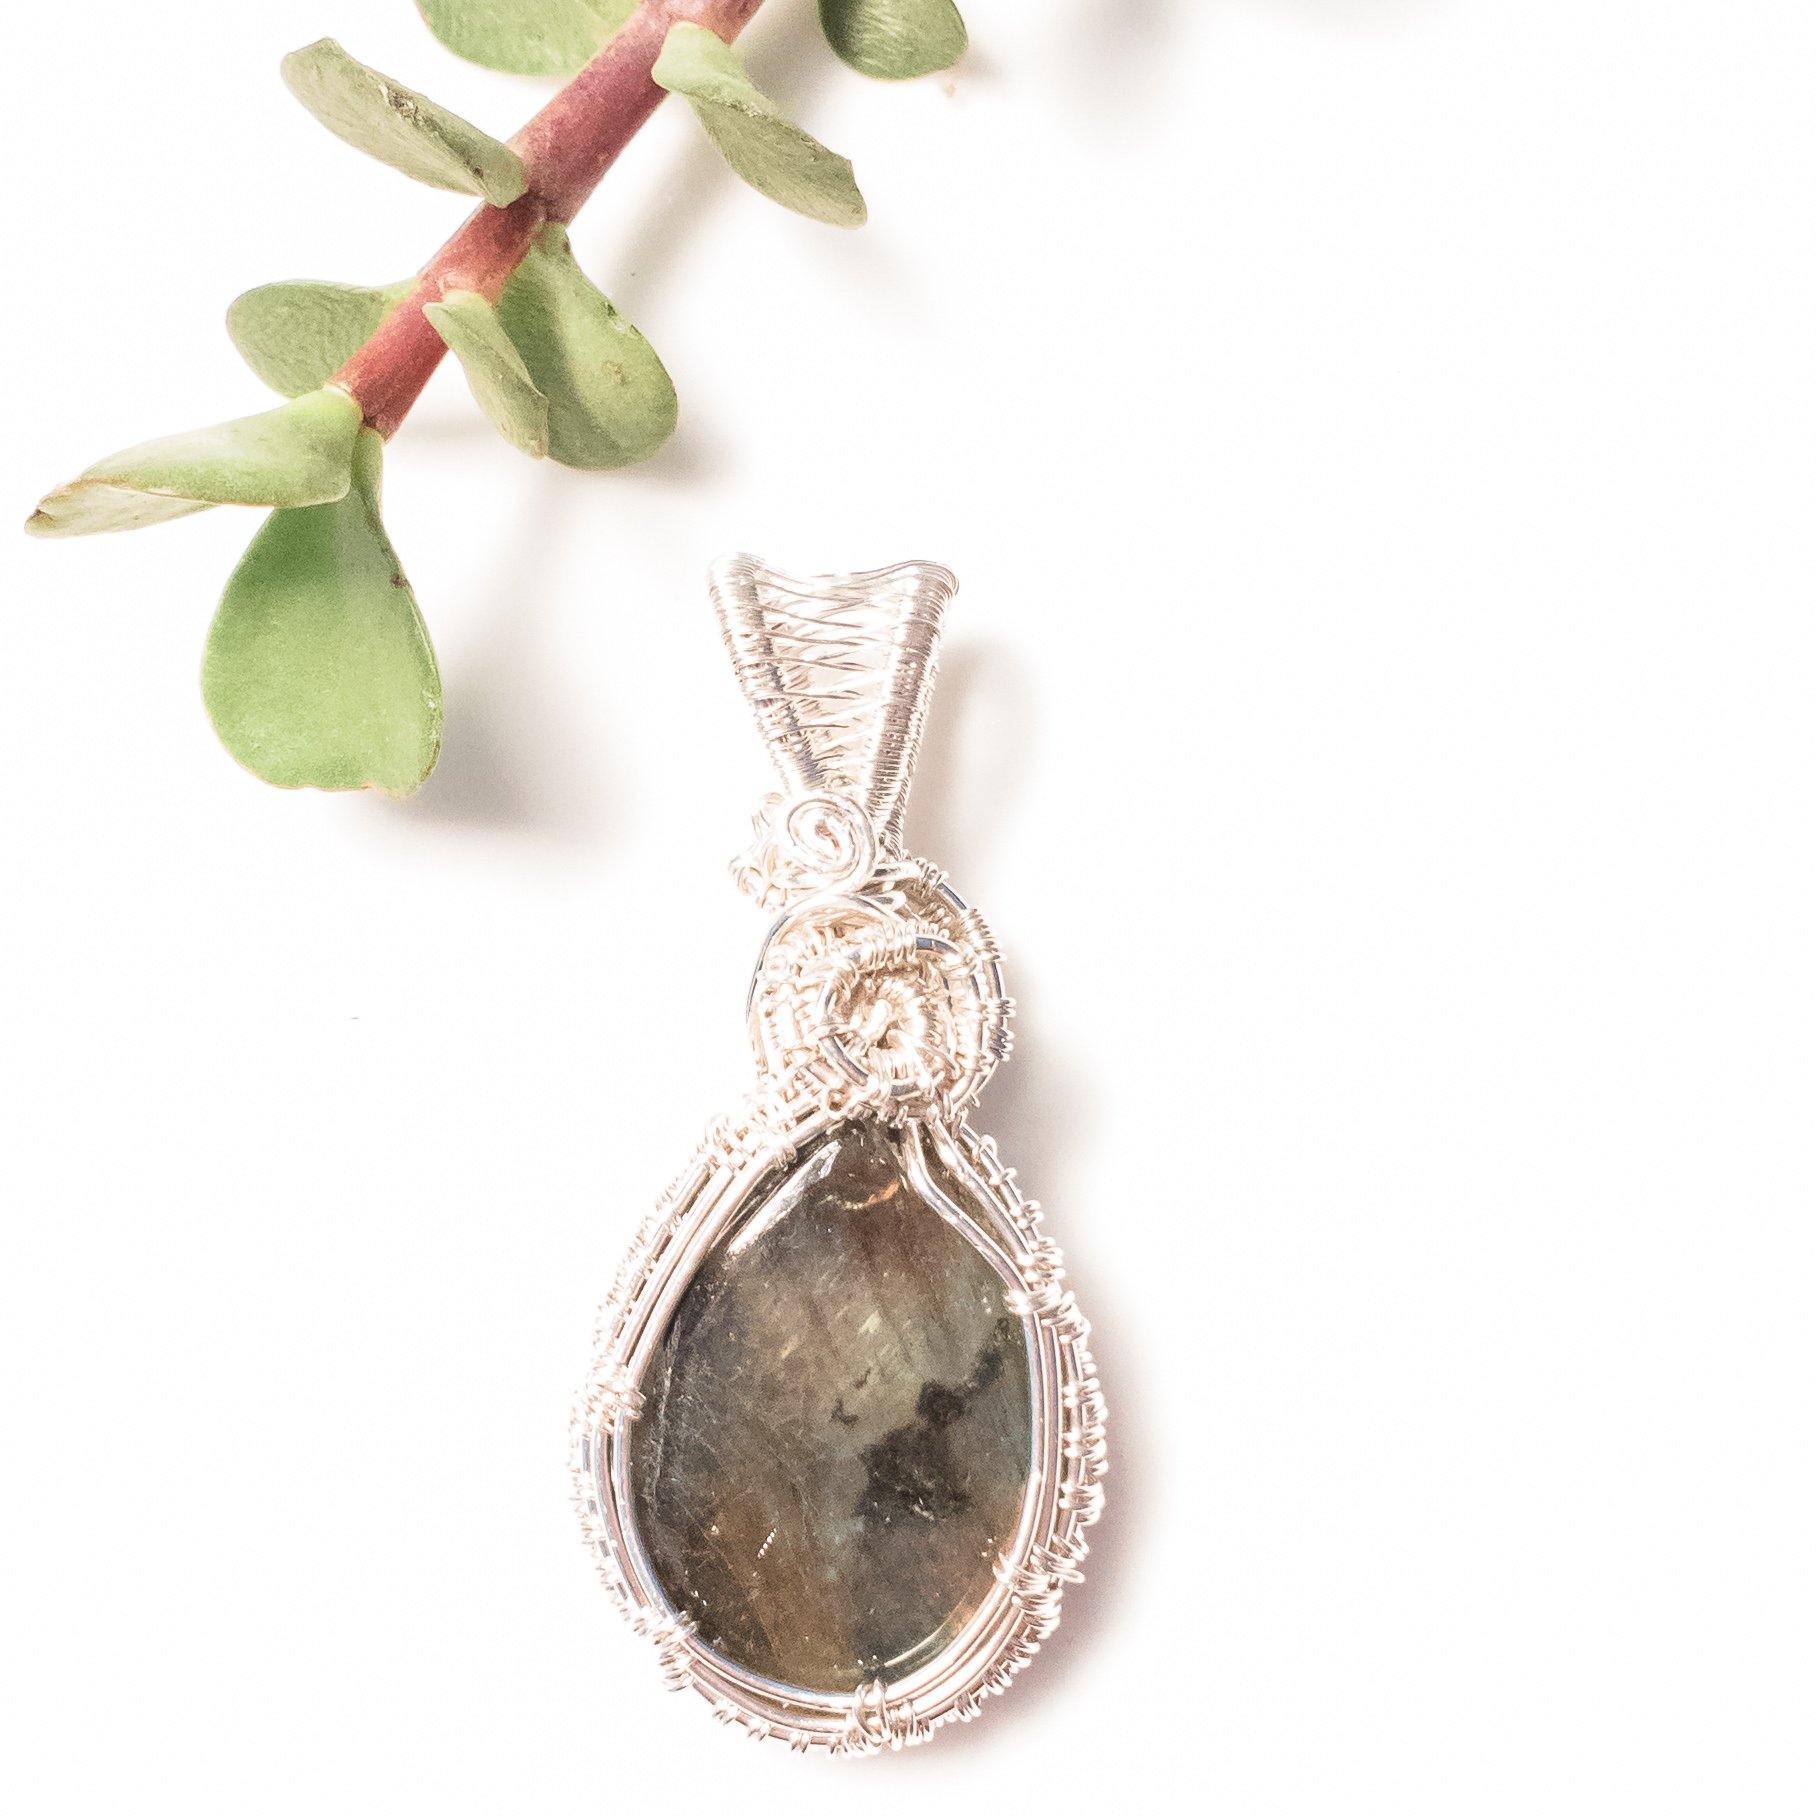 Aurora Collection - Labradorite Pendant in Sterling Silver back side view - BellaChel Jeweler